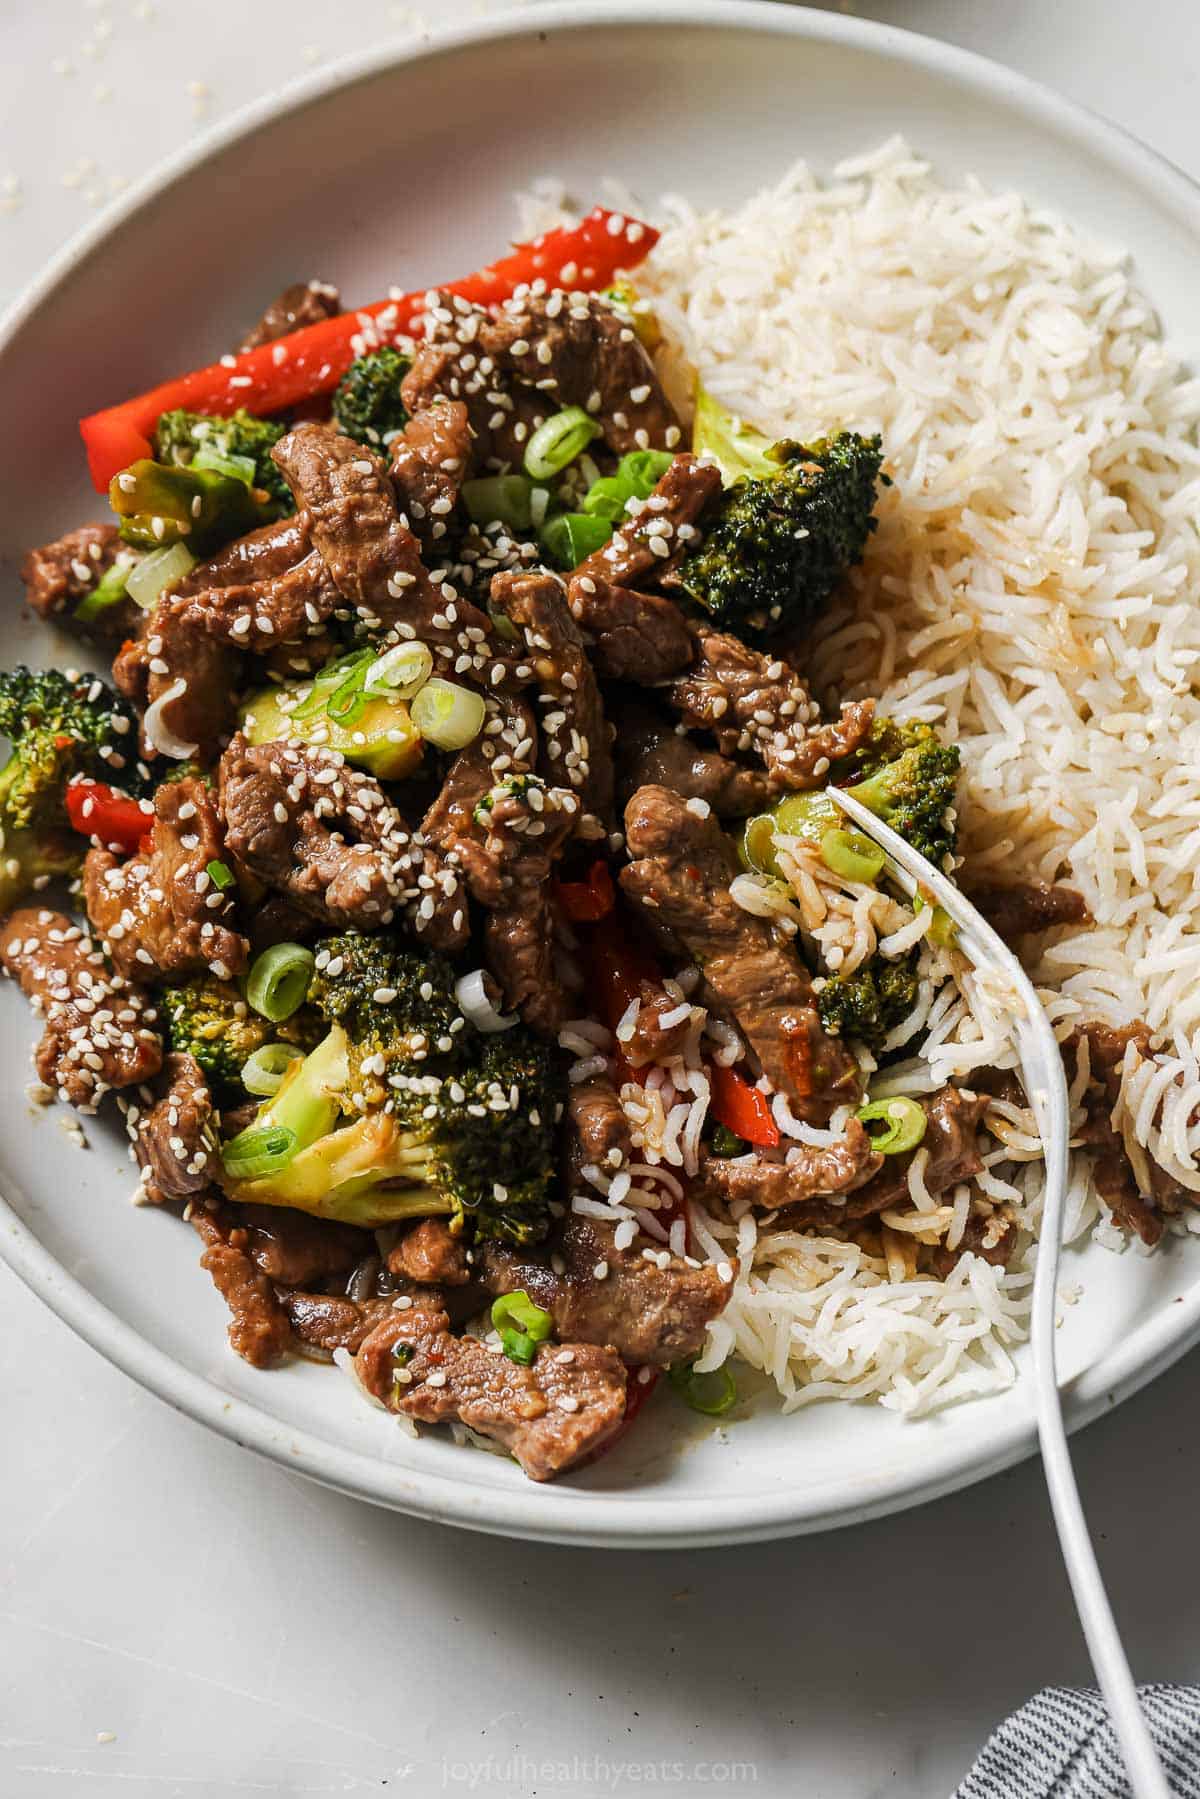 Beef and broccoli stir-fried with rice noodles.